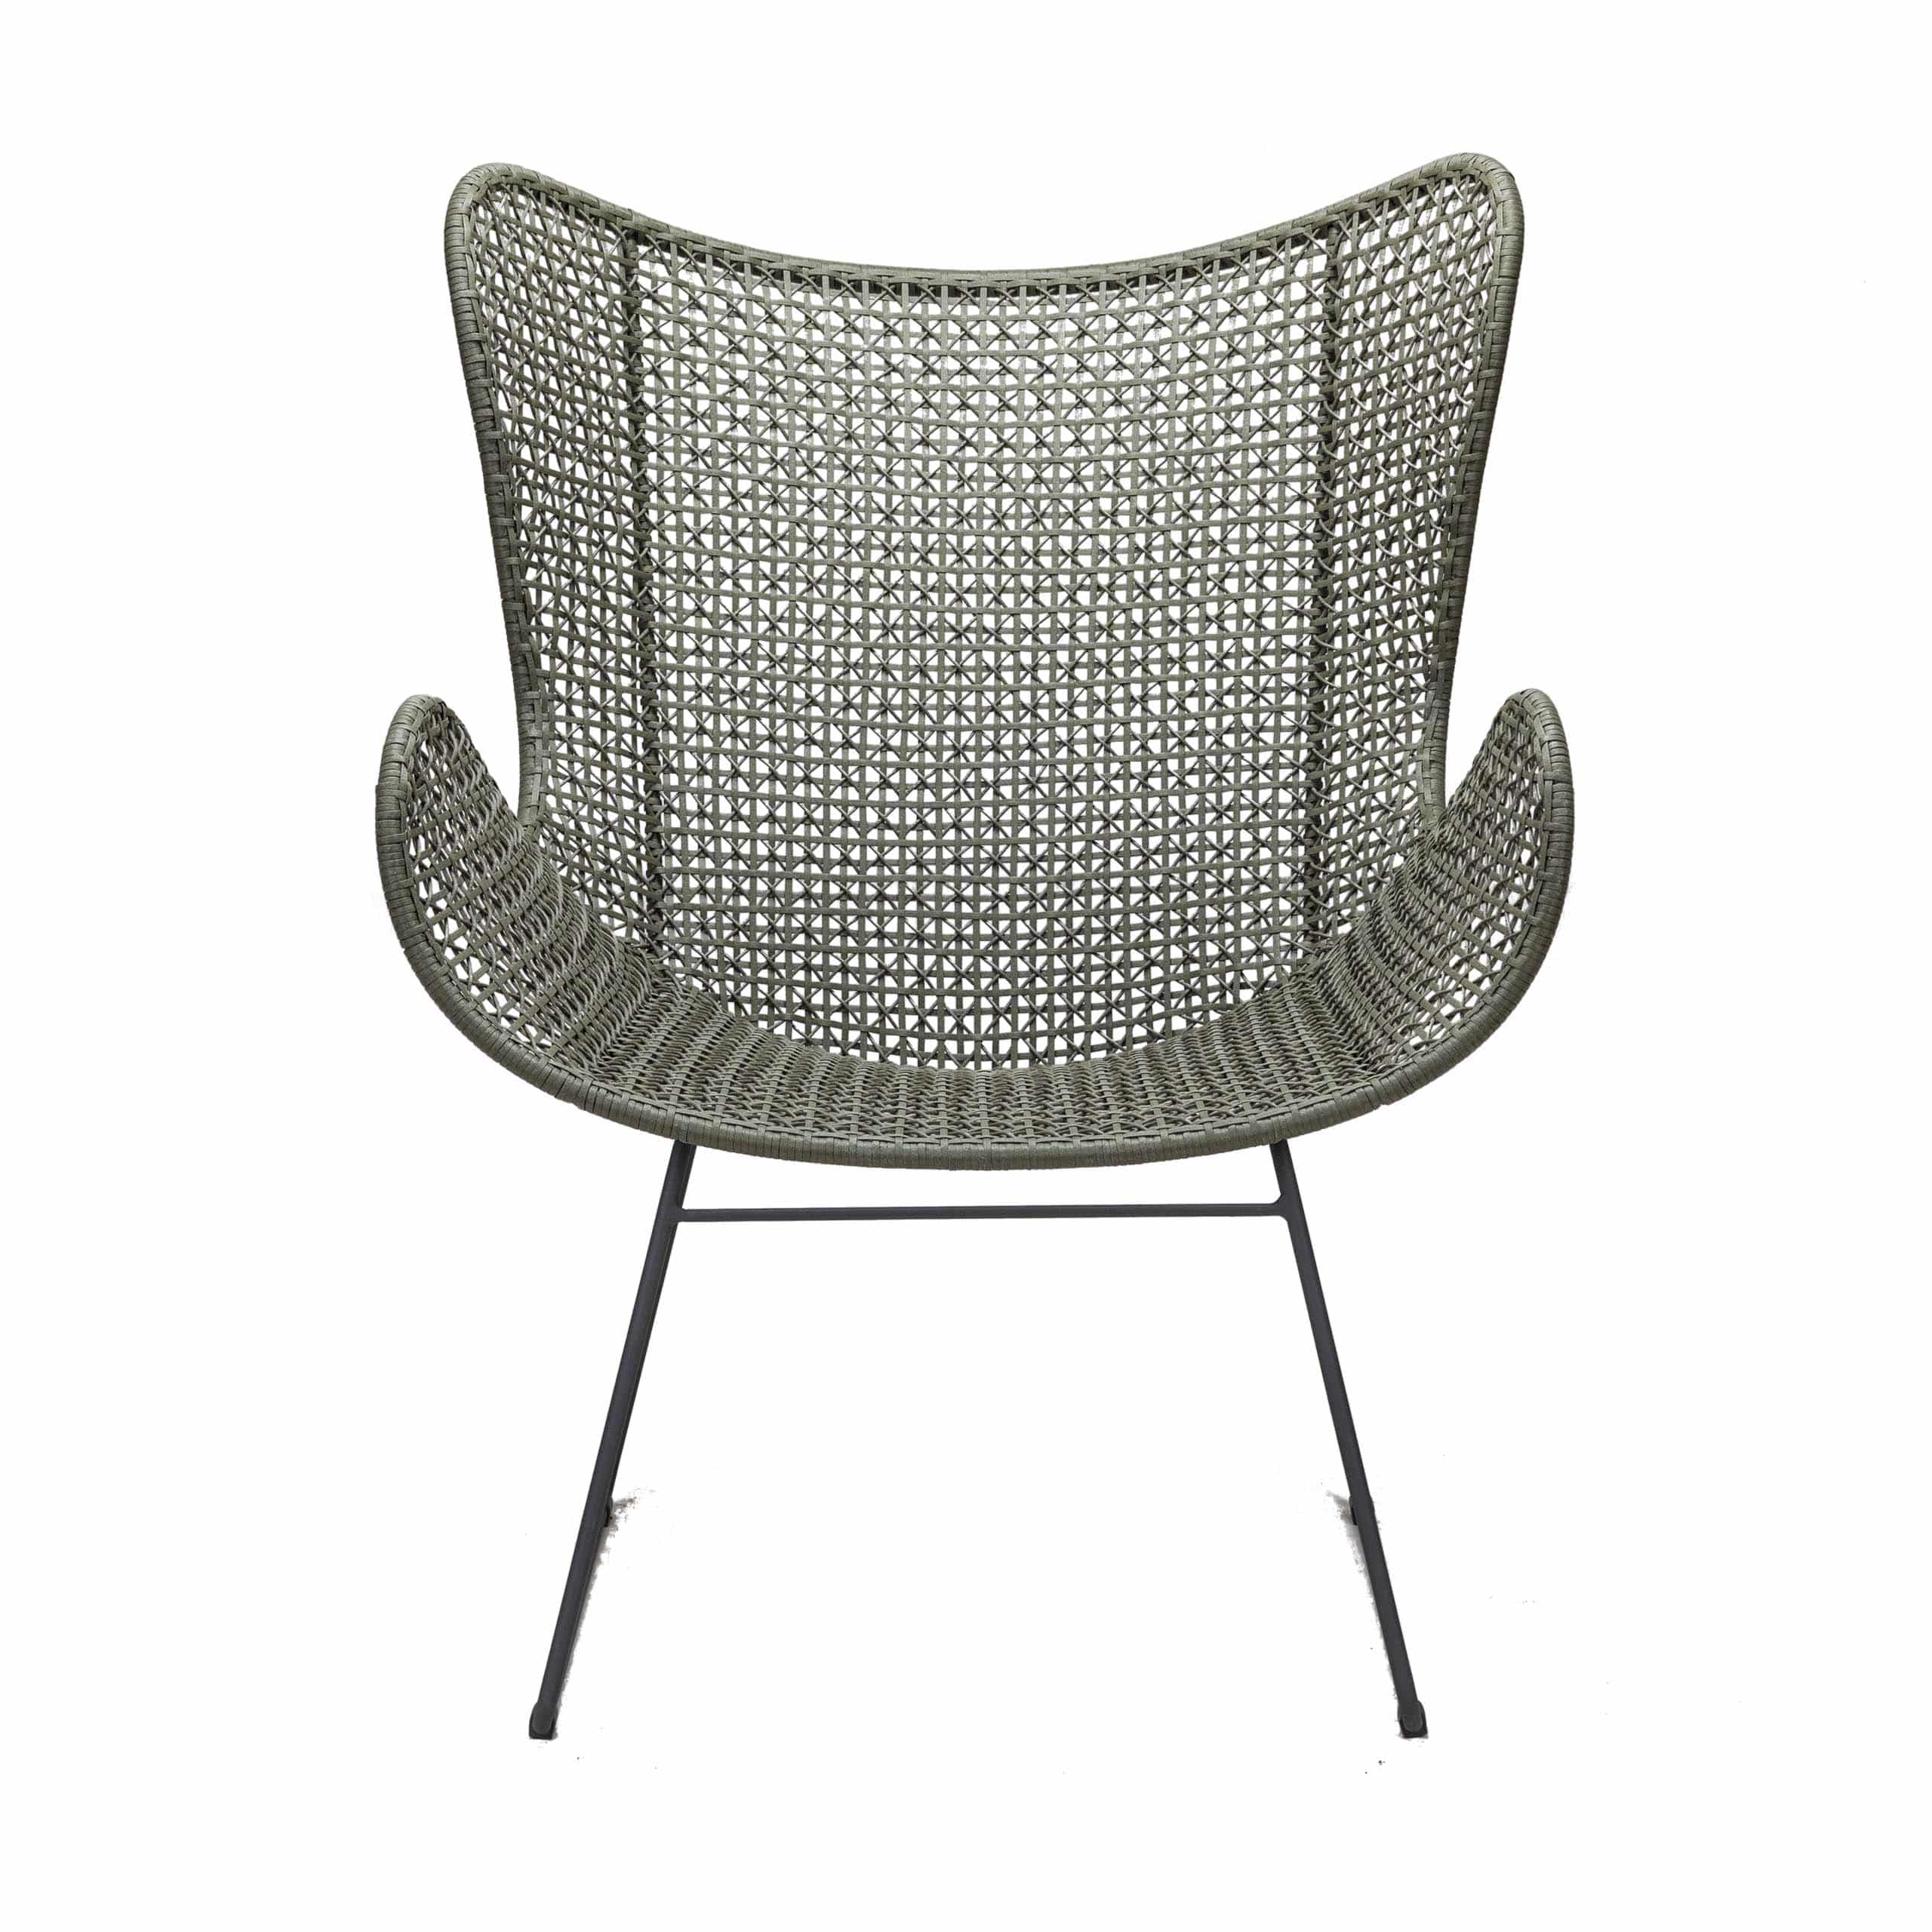 Design Warehouse - 128321 - Lilly Outdoor Wing Chair  - Moss / Graphite